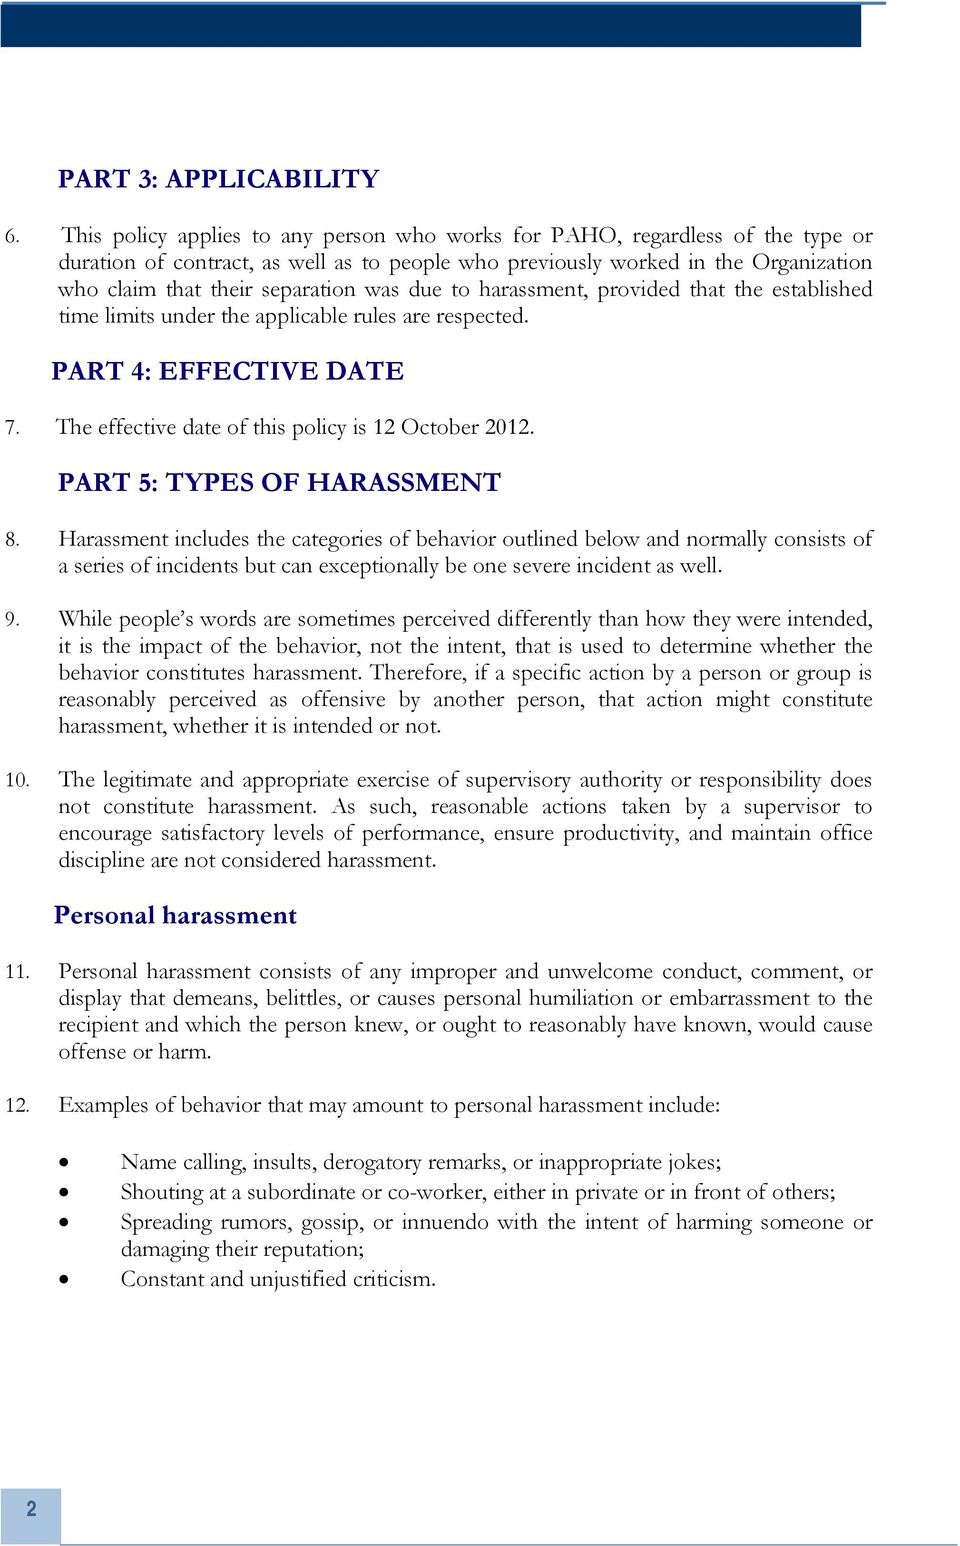 was due to harassment, provided that the established time limits under the applicable rules are respected. PART 4: EFFECTIVE DATE 7. The effective date of this policy is 12 October 2012.